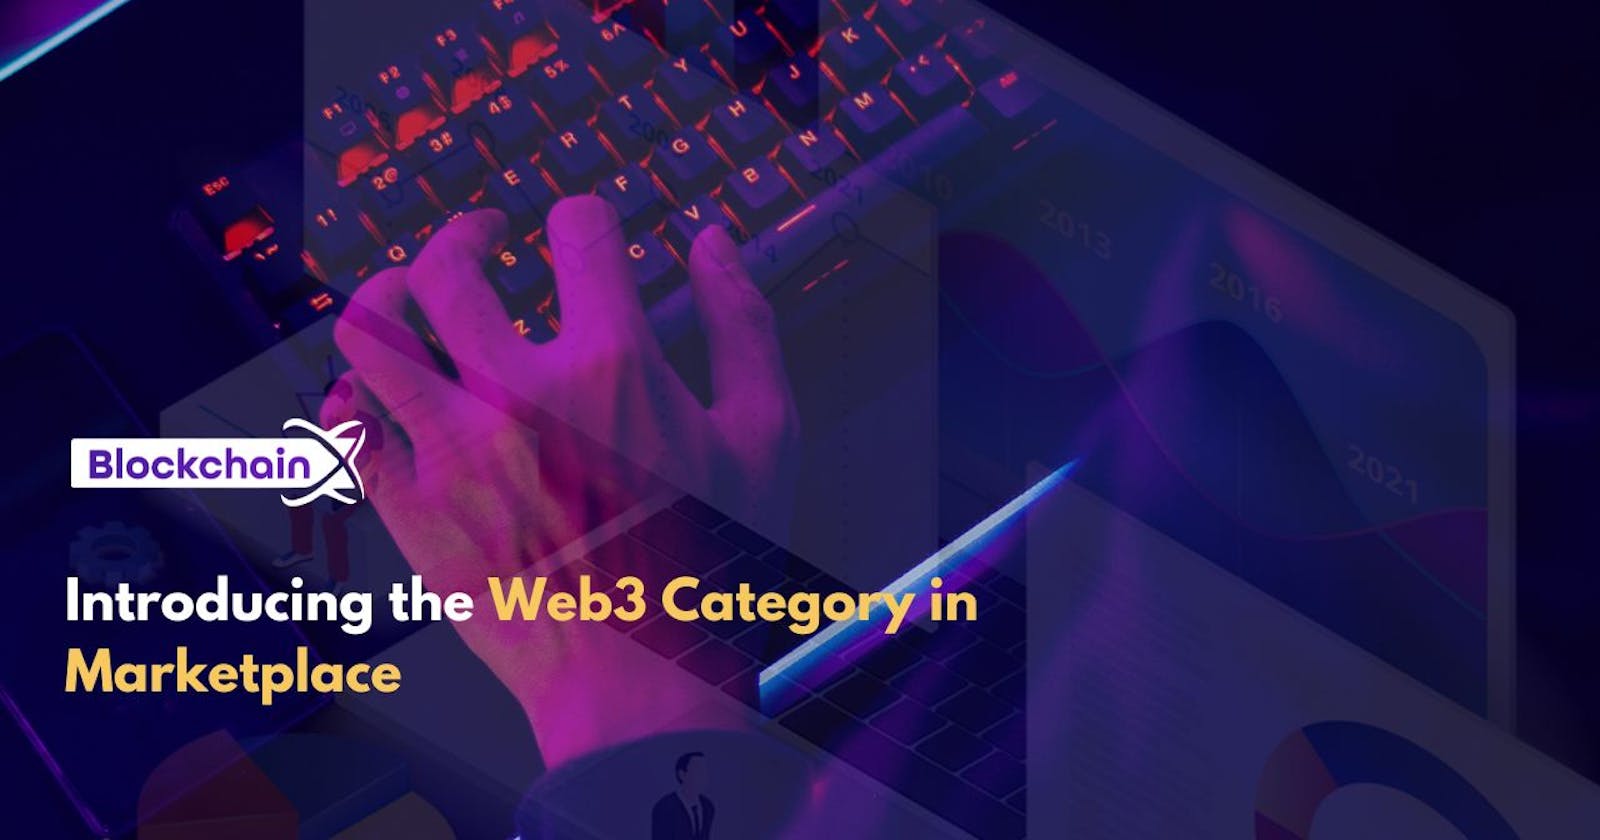 Introducing the Web3 Category in Marketplace